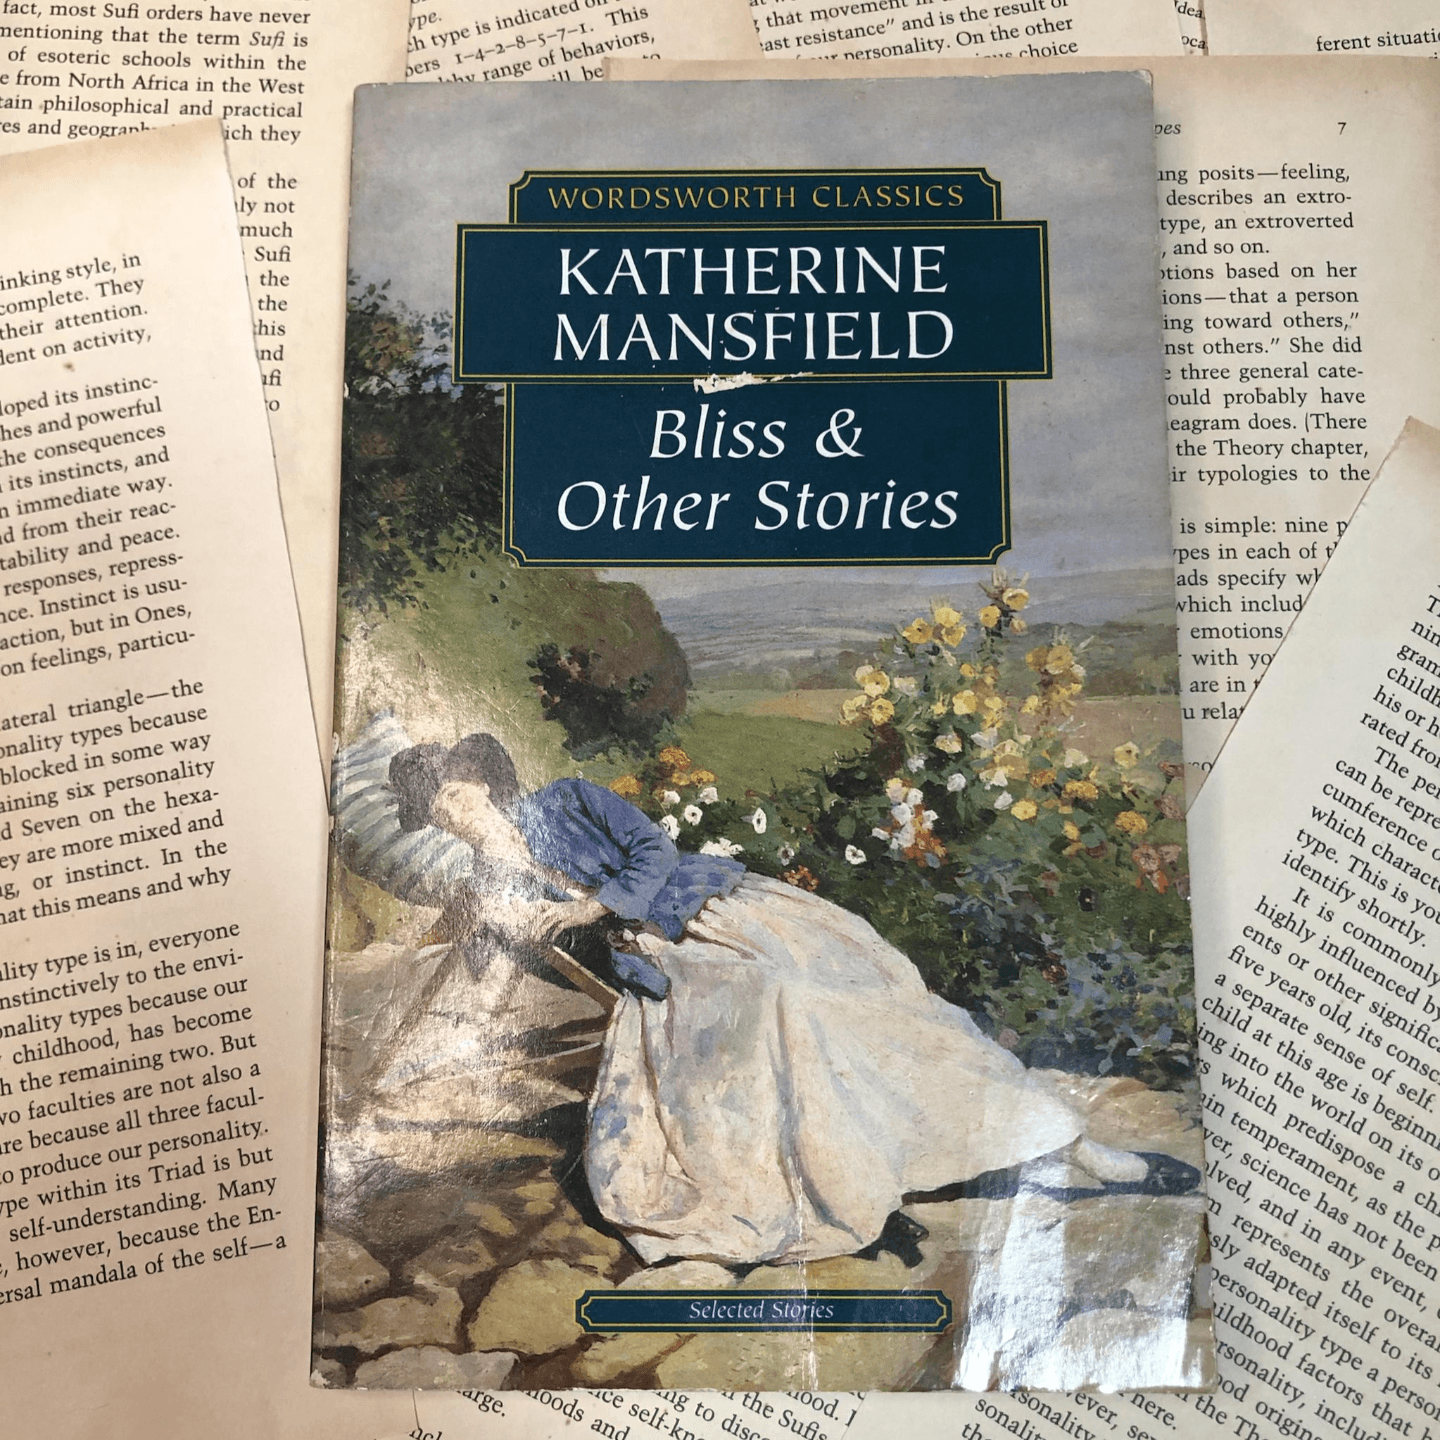 Bliss & Other Stories by Katherine Mansfield [Paperback]